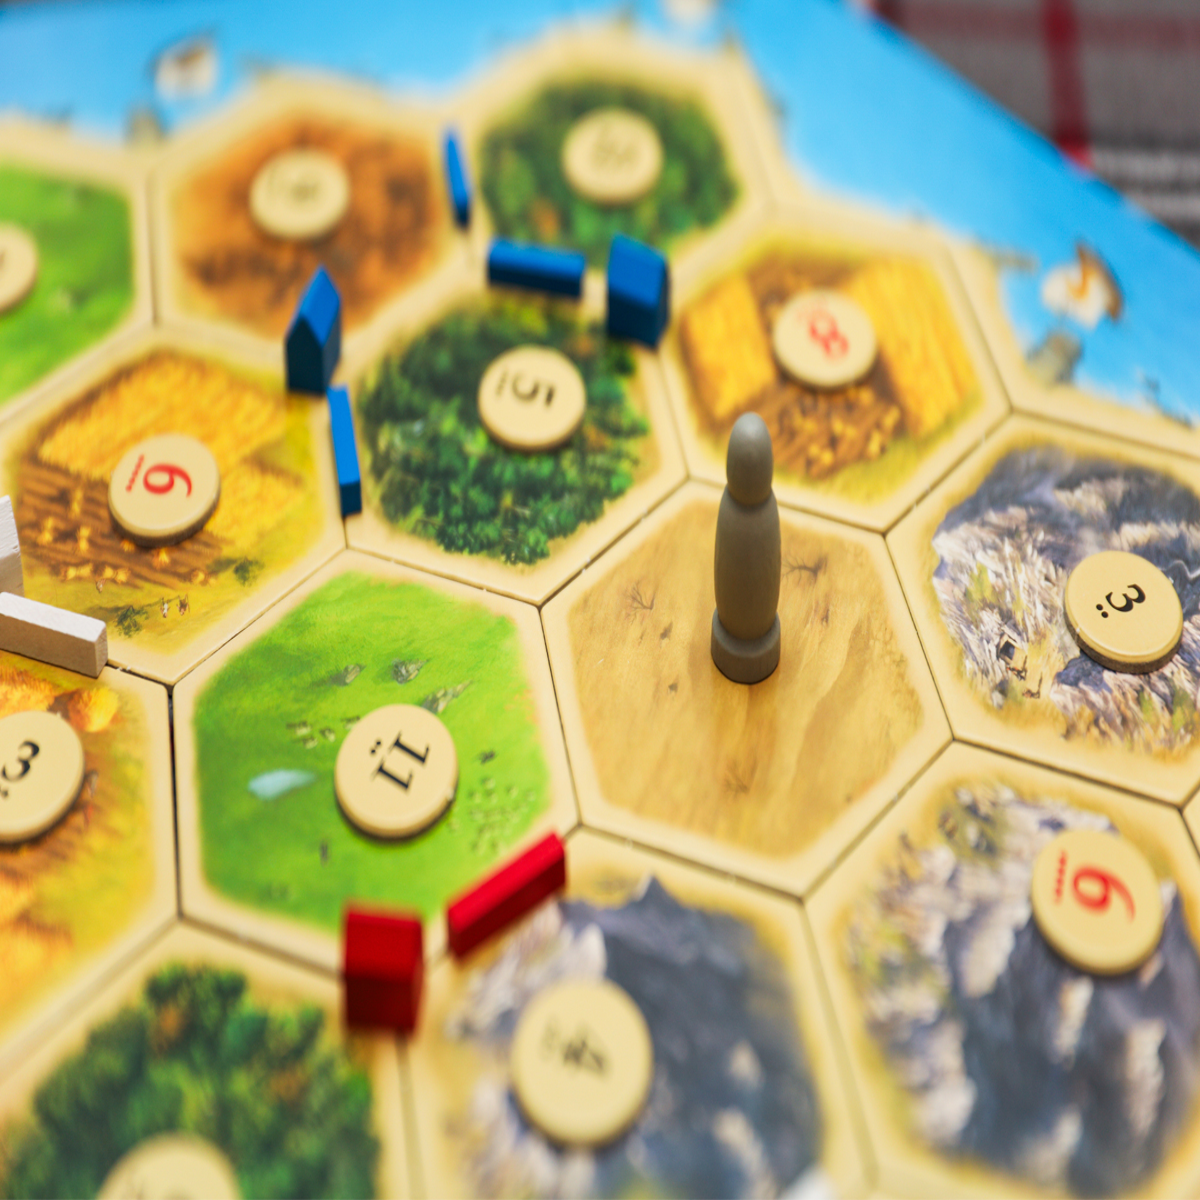 How to play Catan: board game's rules, setup and how to win explained